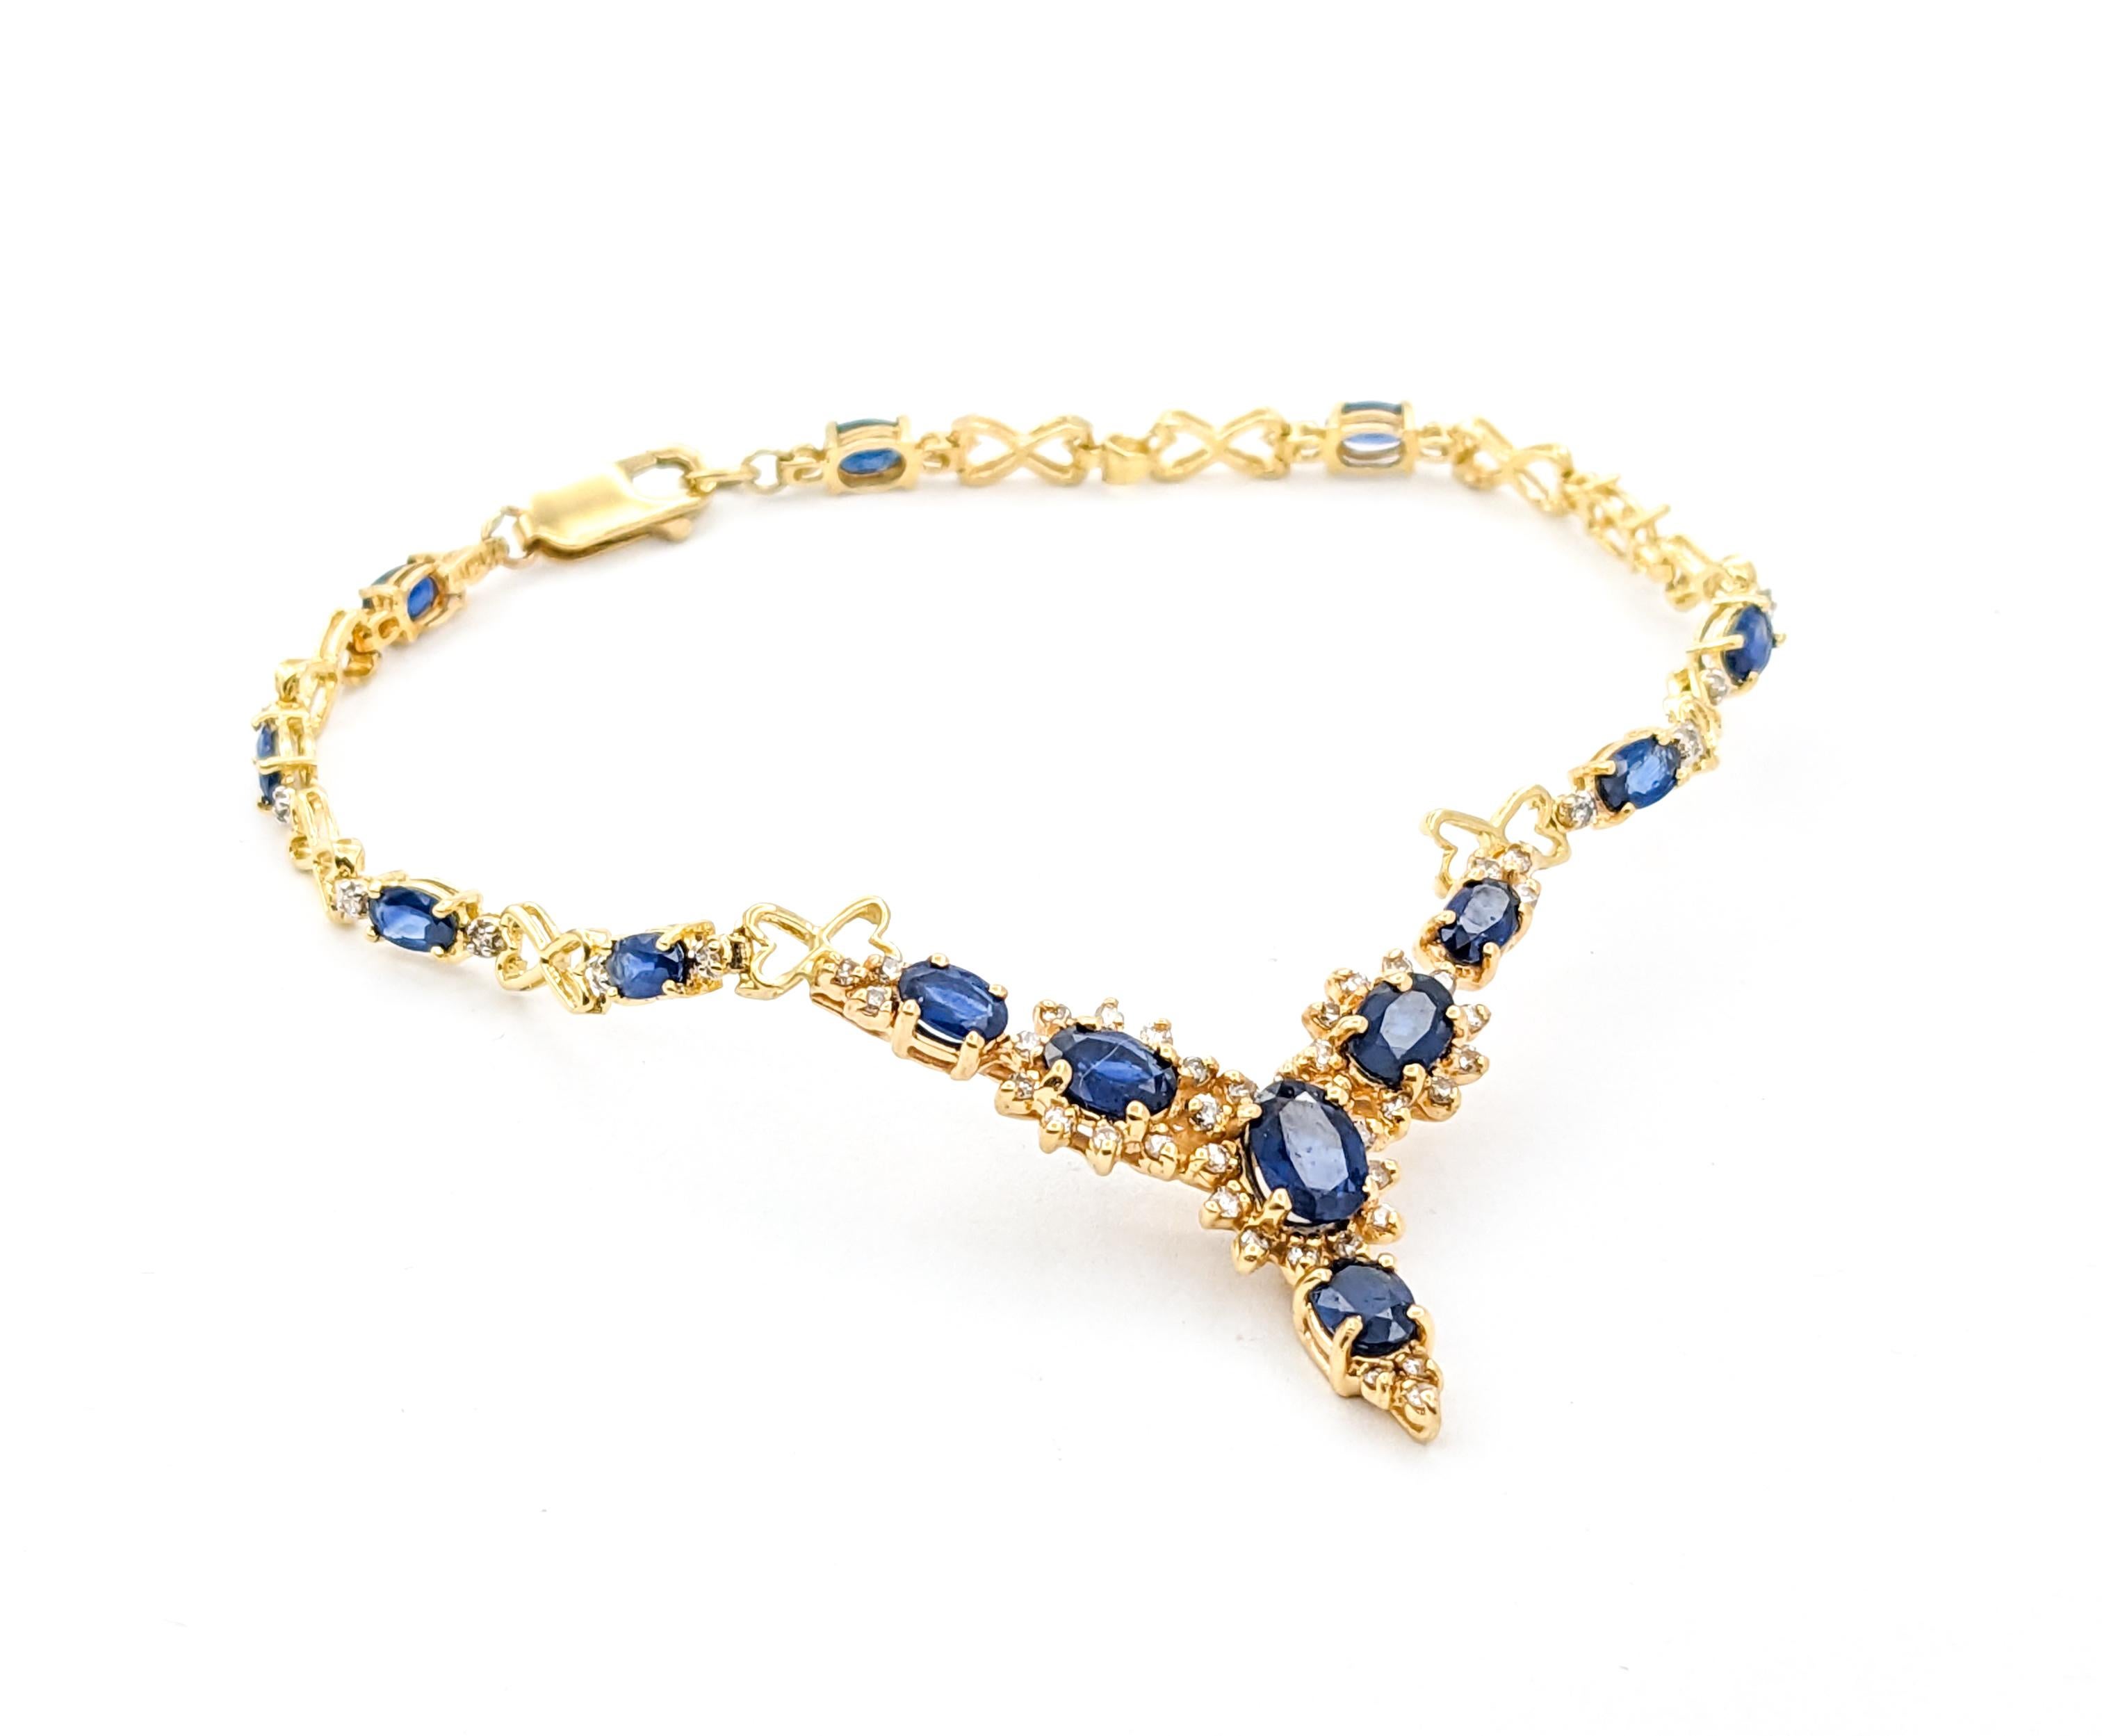 3.5ctw Sapphire & Diamond Bracelet In Yellow Gold

Discover the timeless elegance of this stunning bracelet, exquisitely crafted in 14kt yellow gold. This luxurious piece is adorned with .33ctw of radiant round diamonds, each boasting I clarity and